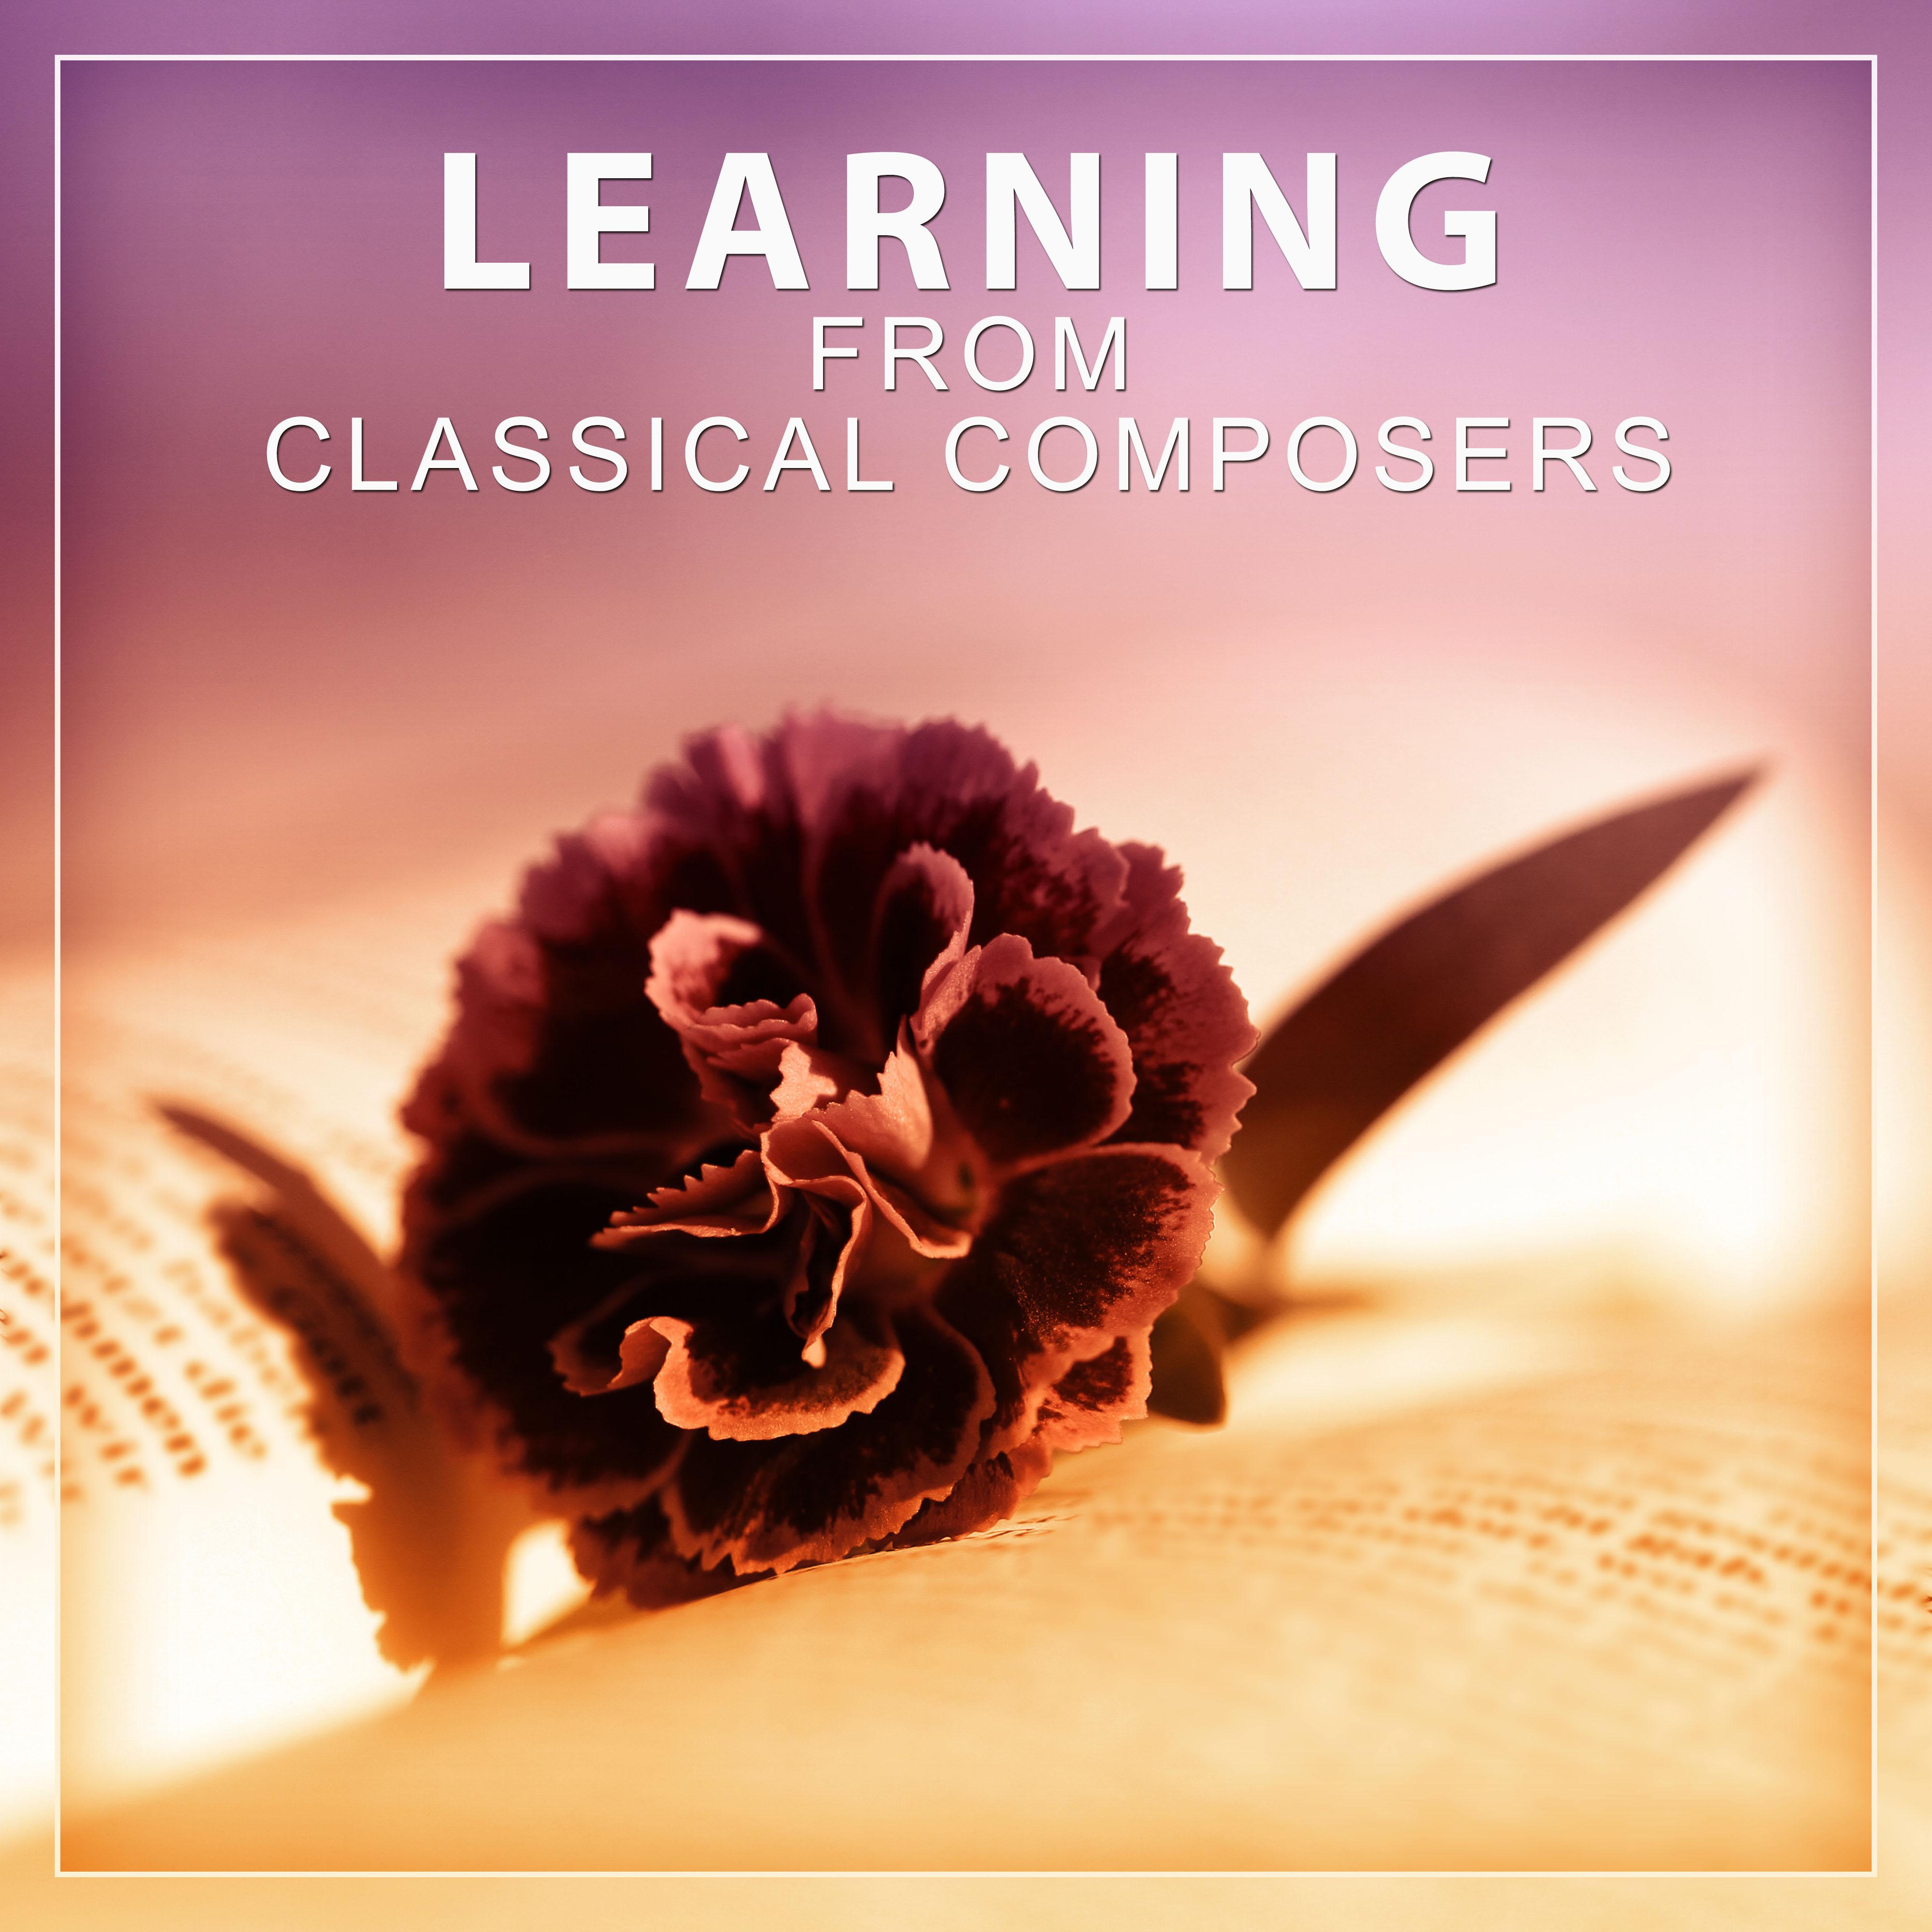 Learning from Classical Composers – Mozart, Bach, Beethoven for Study, Relaxing Time with Classical Songs, Learning with Piano